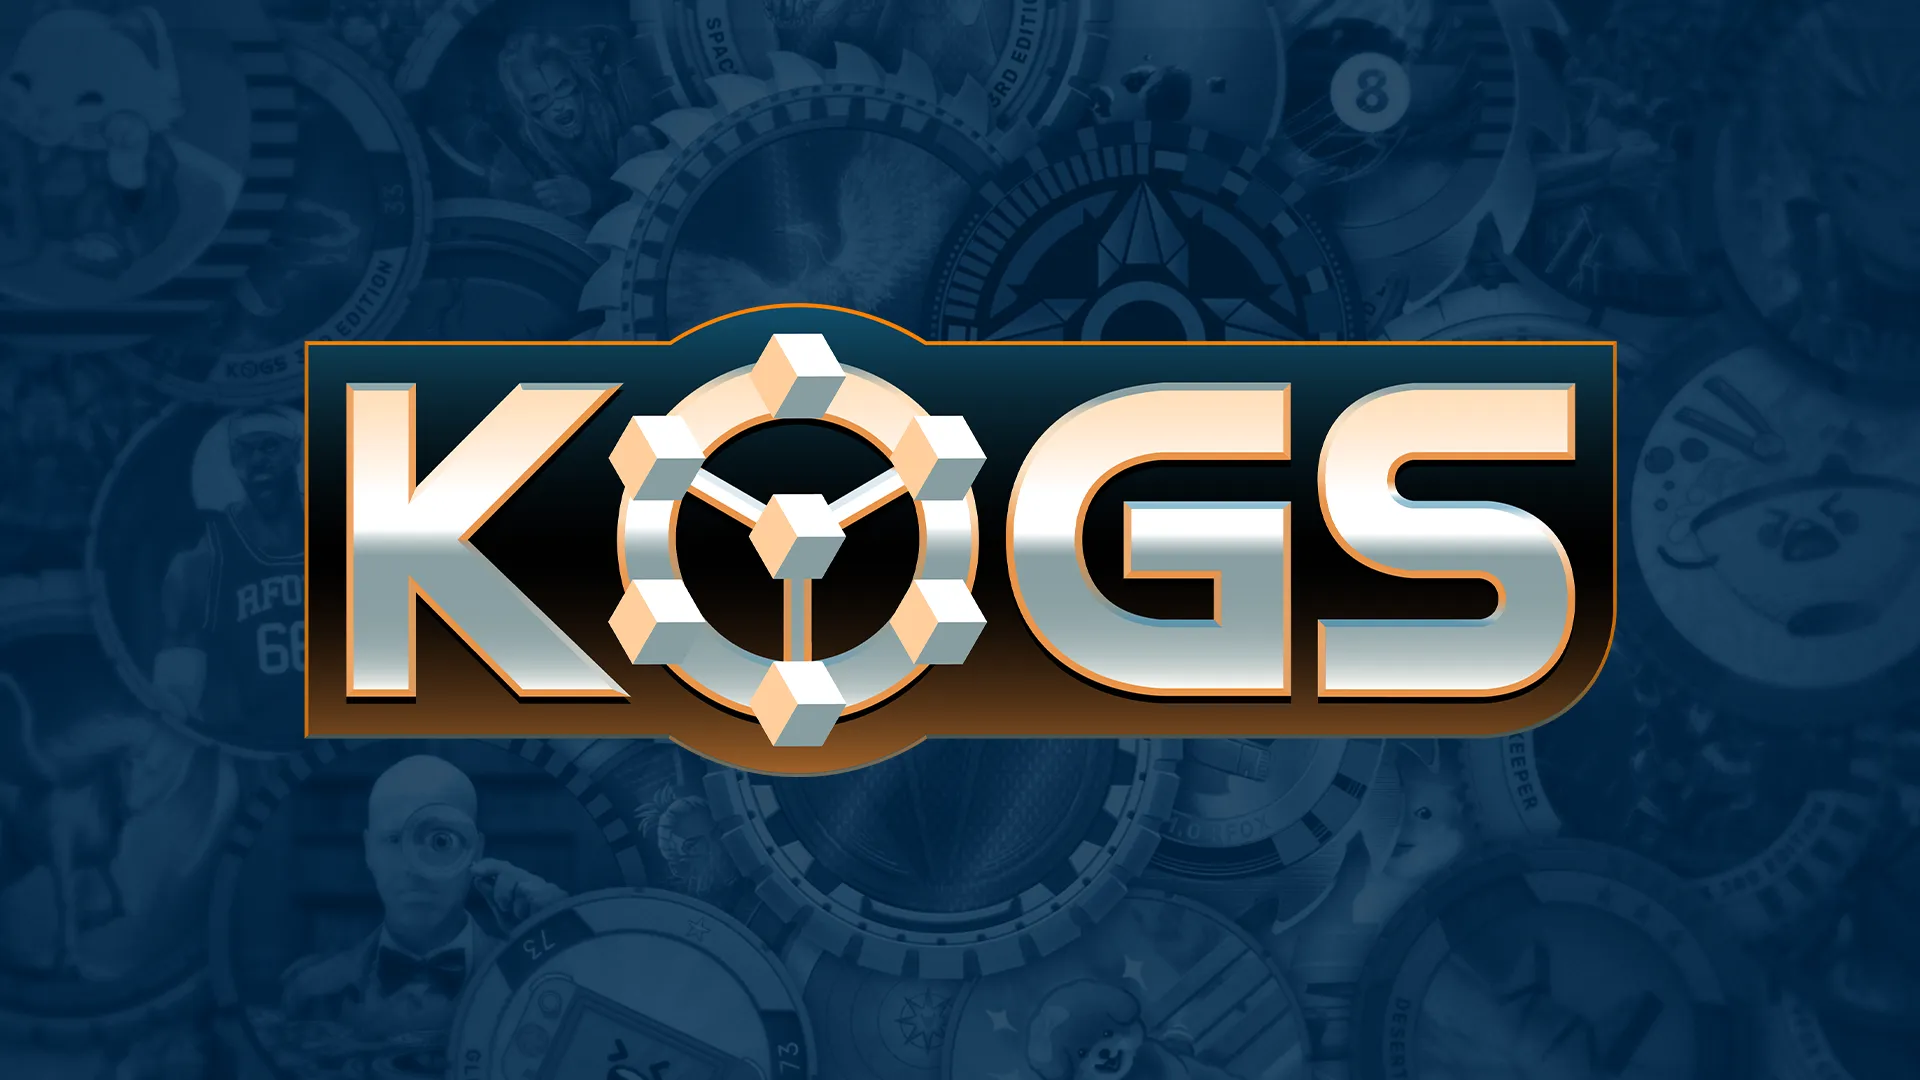 Happy Valentine’s Day From The KOGS Team! Featured Image Asset